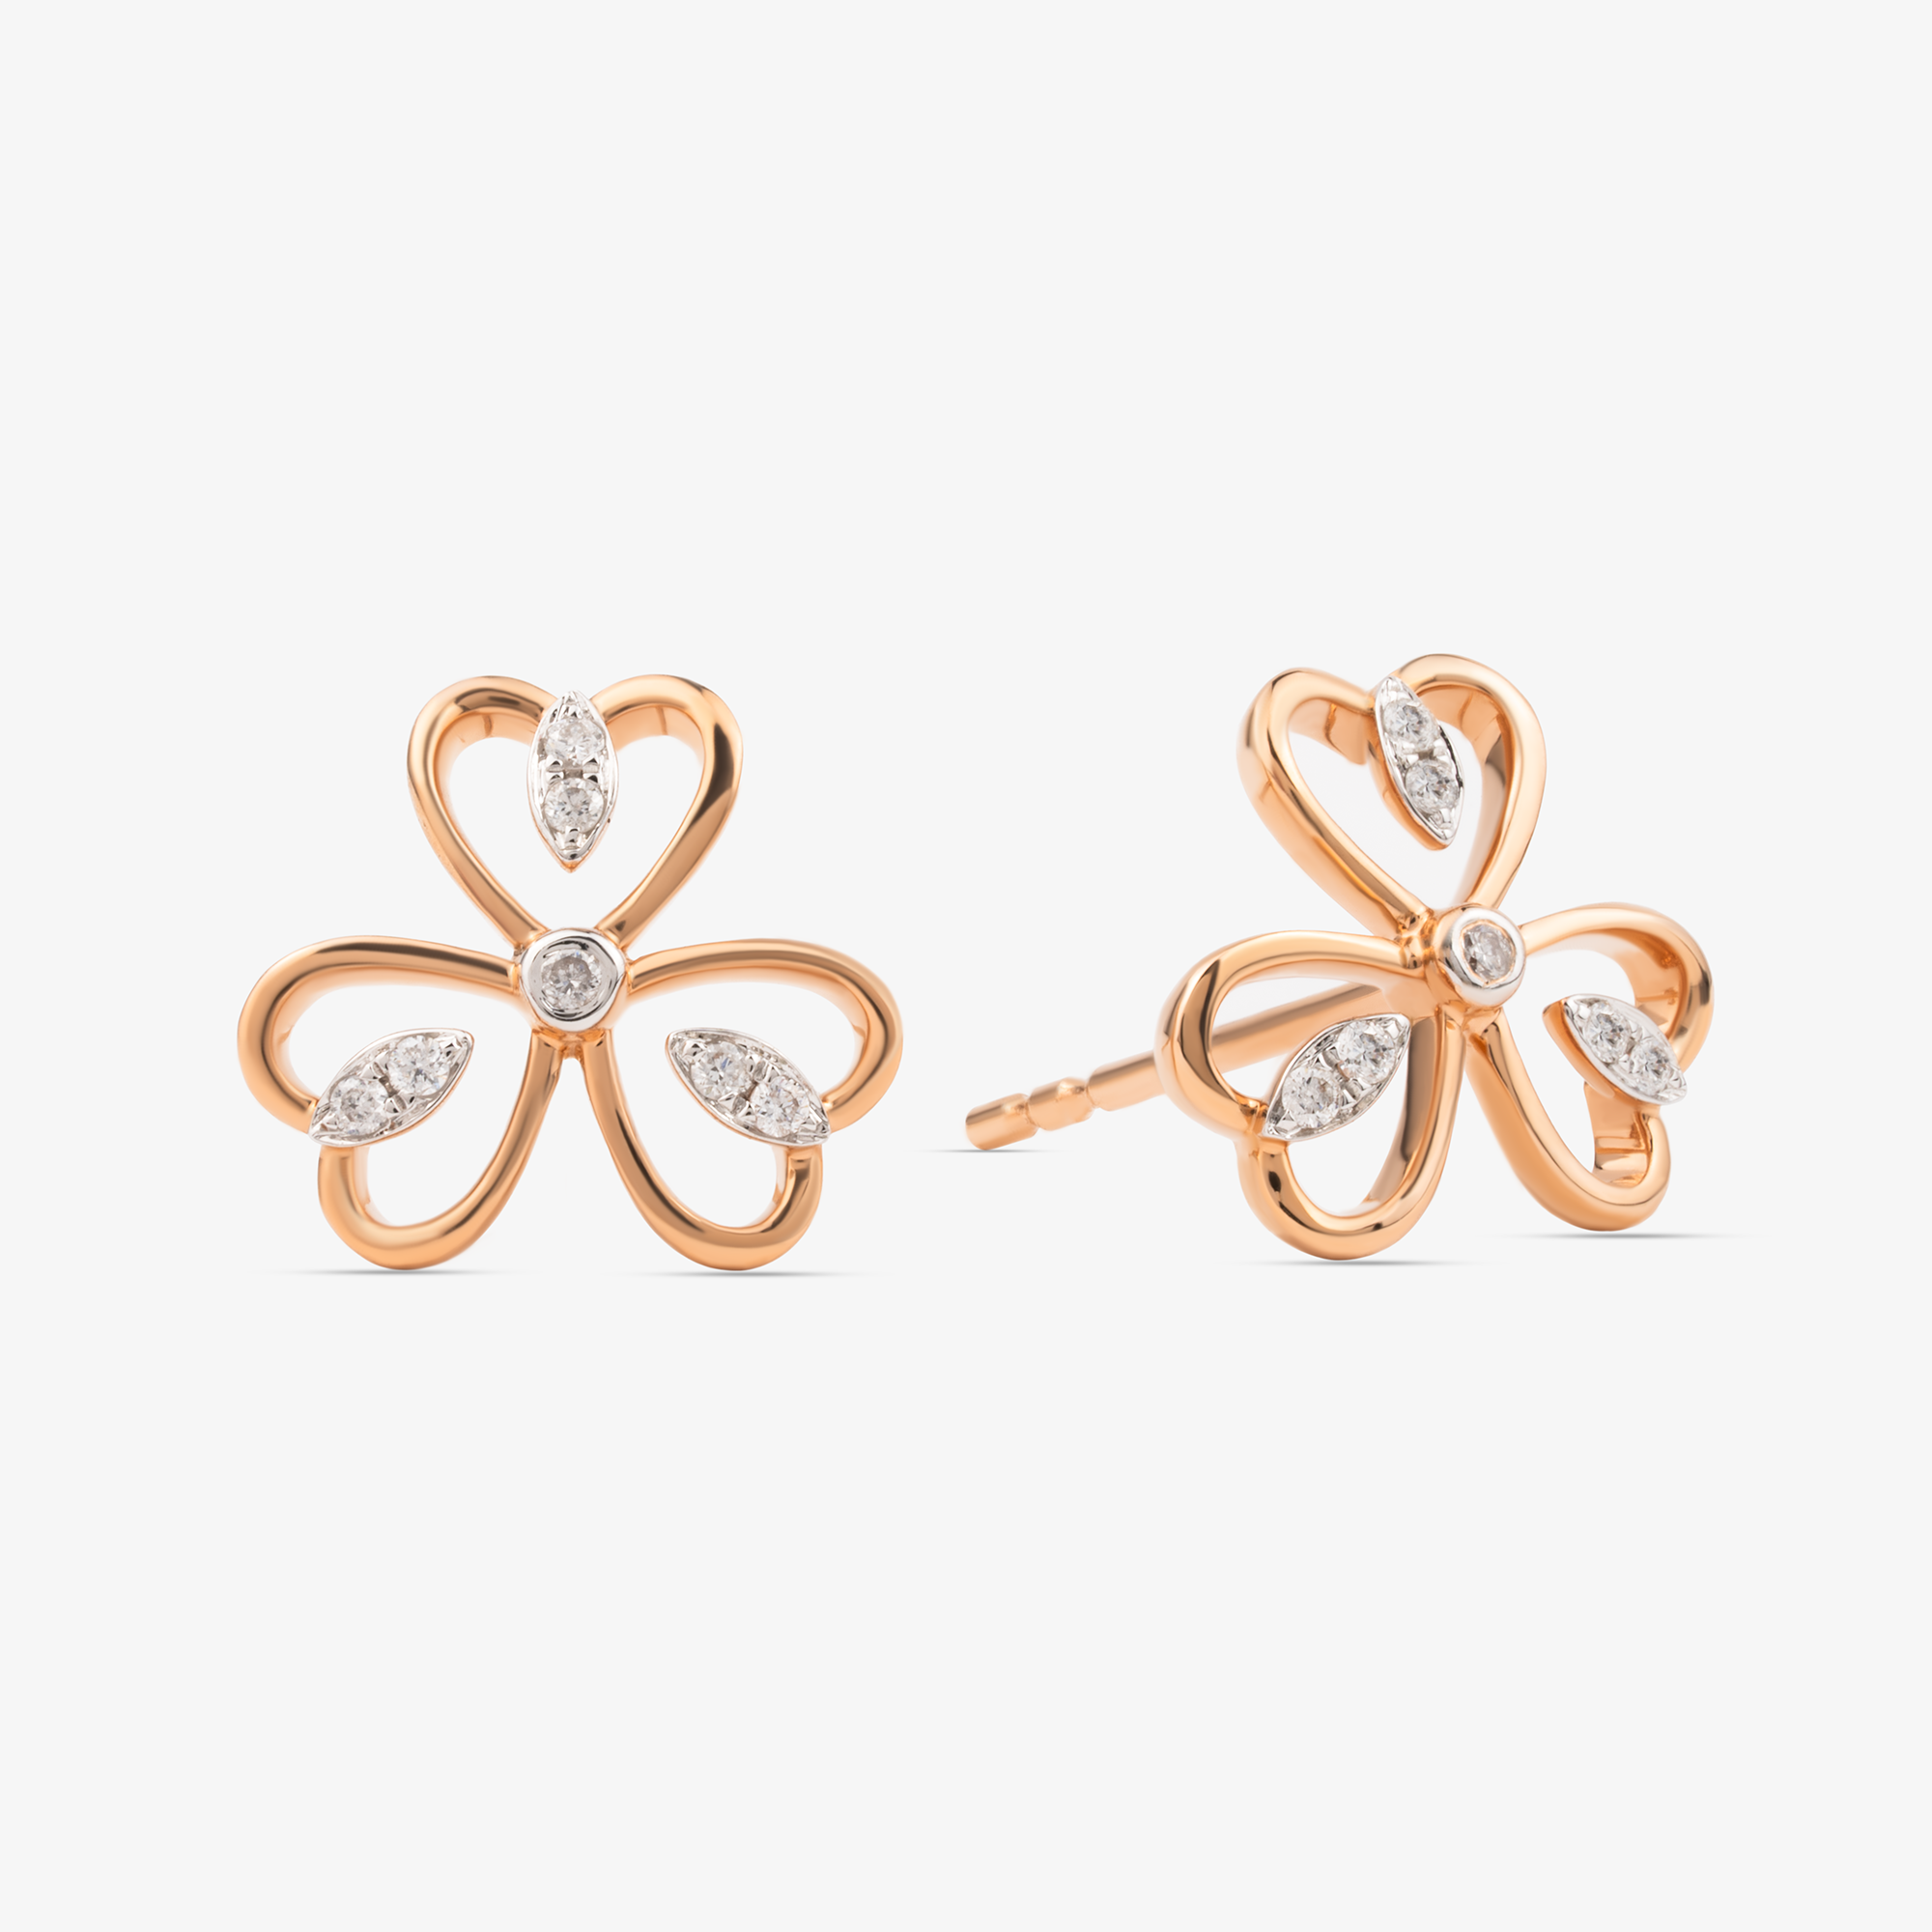 Floral Earrings In 18K Solid Rose Gold With Diamonds